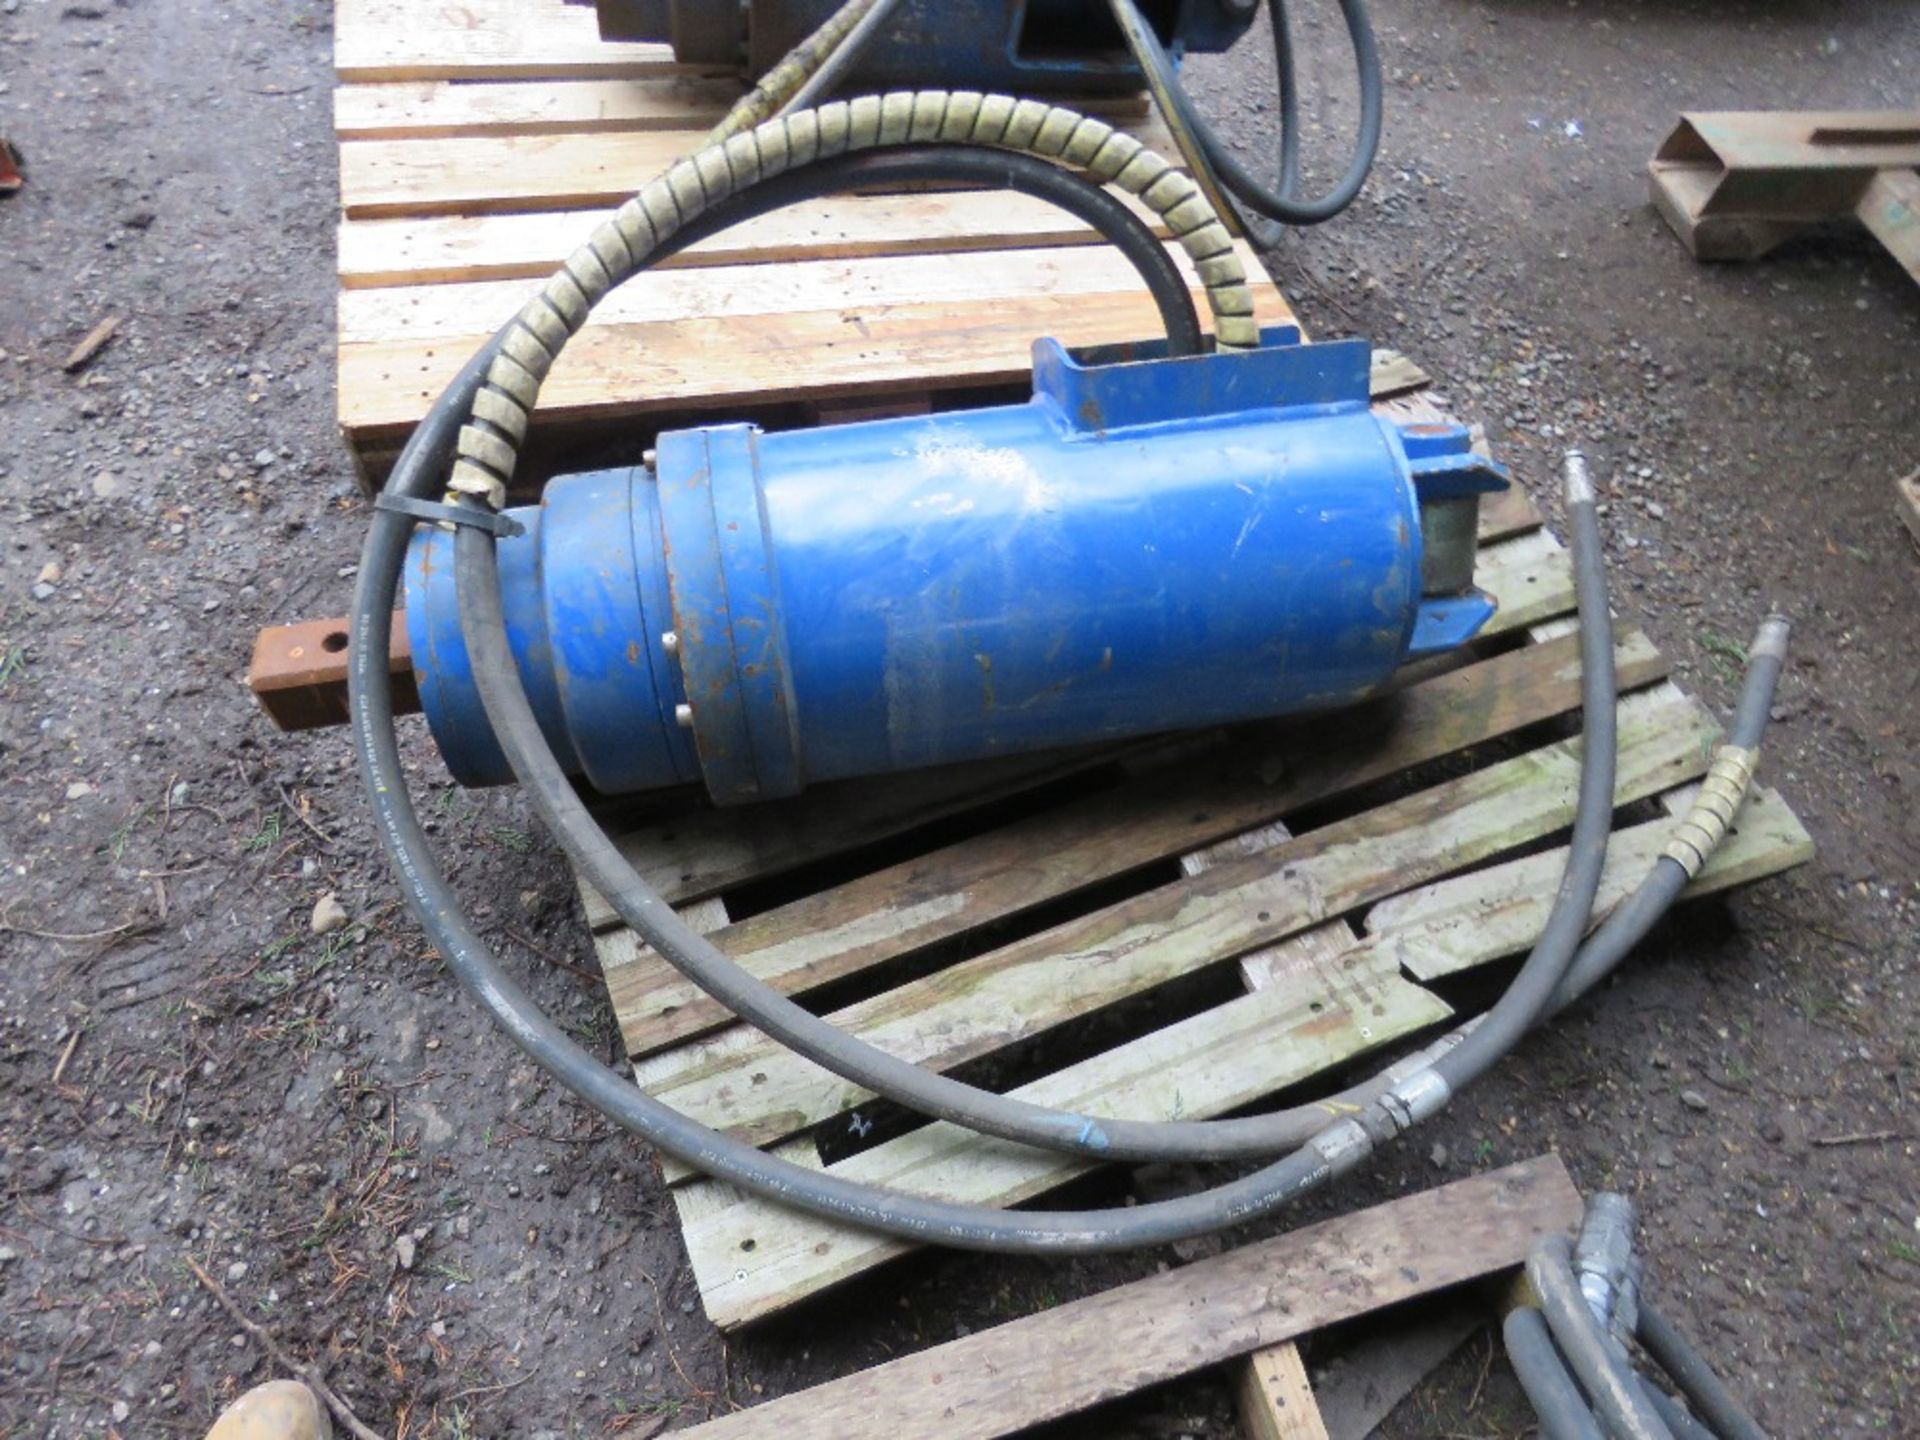 LARGE SIZED AUGER DRIVE HEAD FOR EXCAVATOR WITH 75MM SQUARE DRIVE SHAFT. - Image 3 of 3